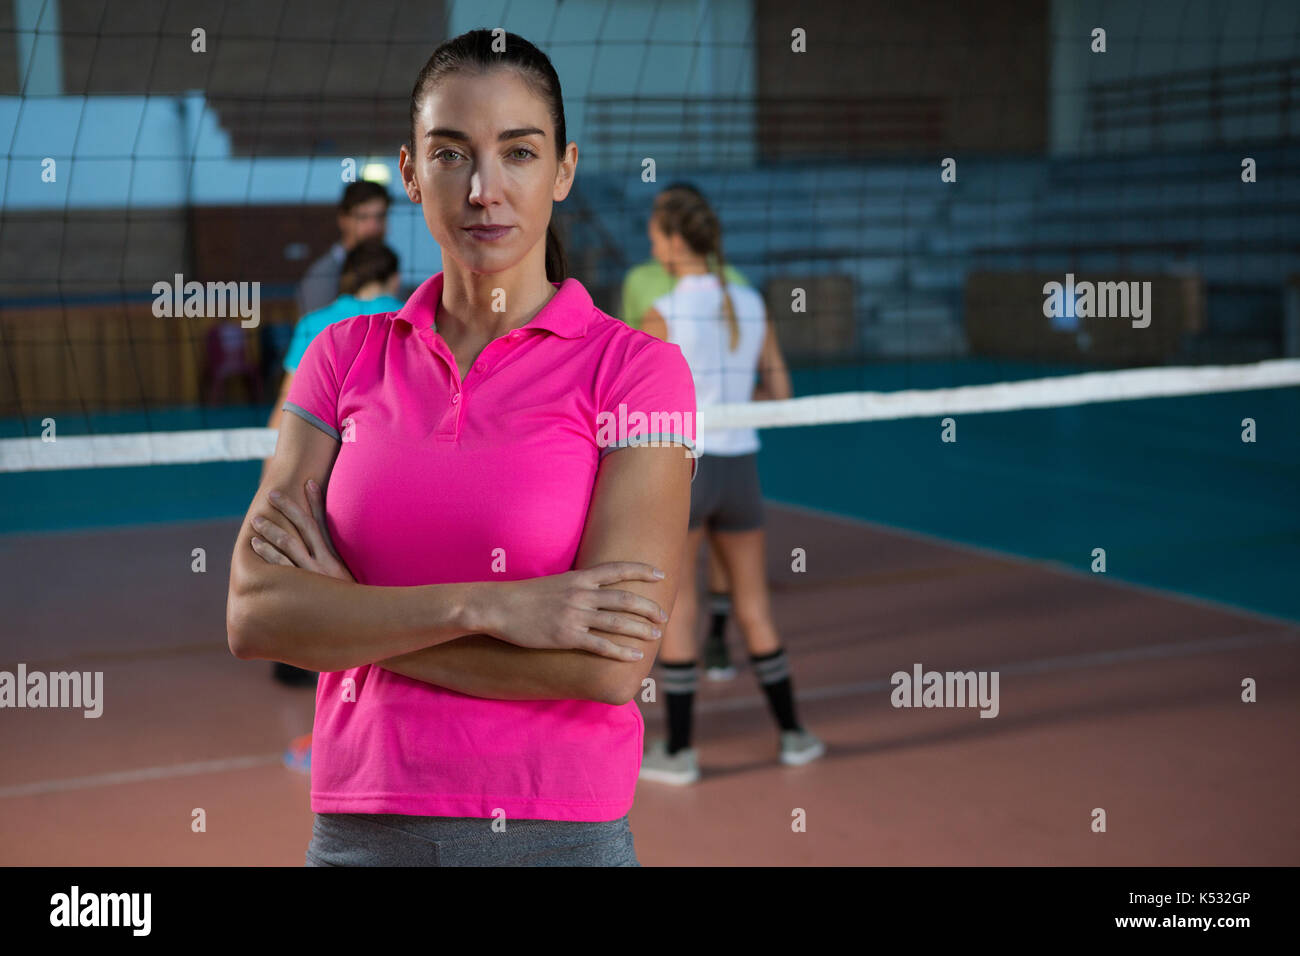 Portrait of female volleyball player with teammates playing in background at court Stock Photo